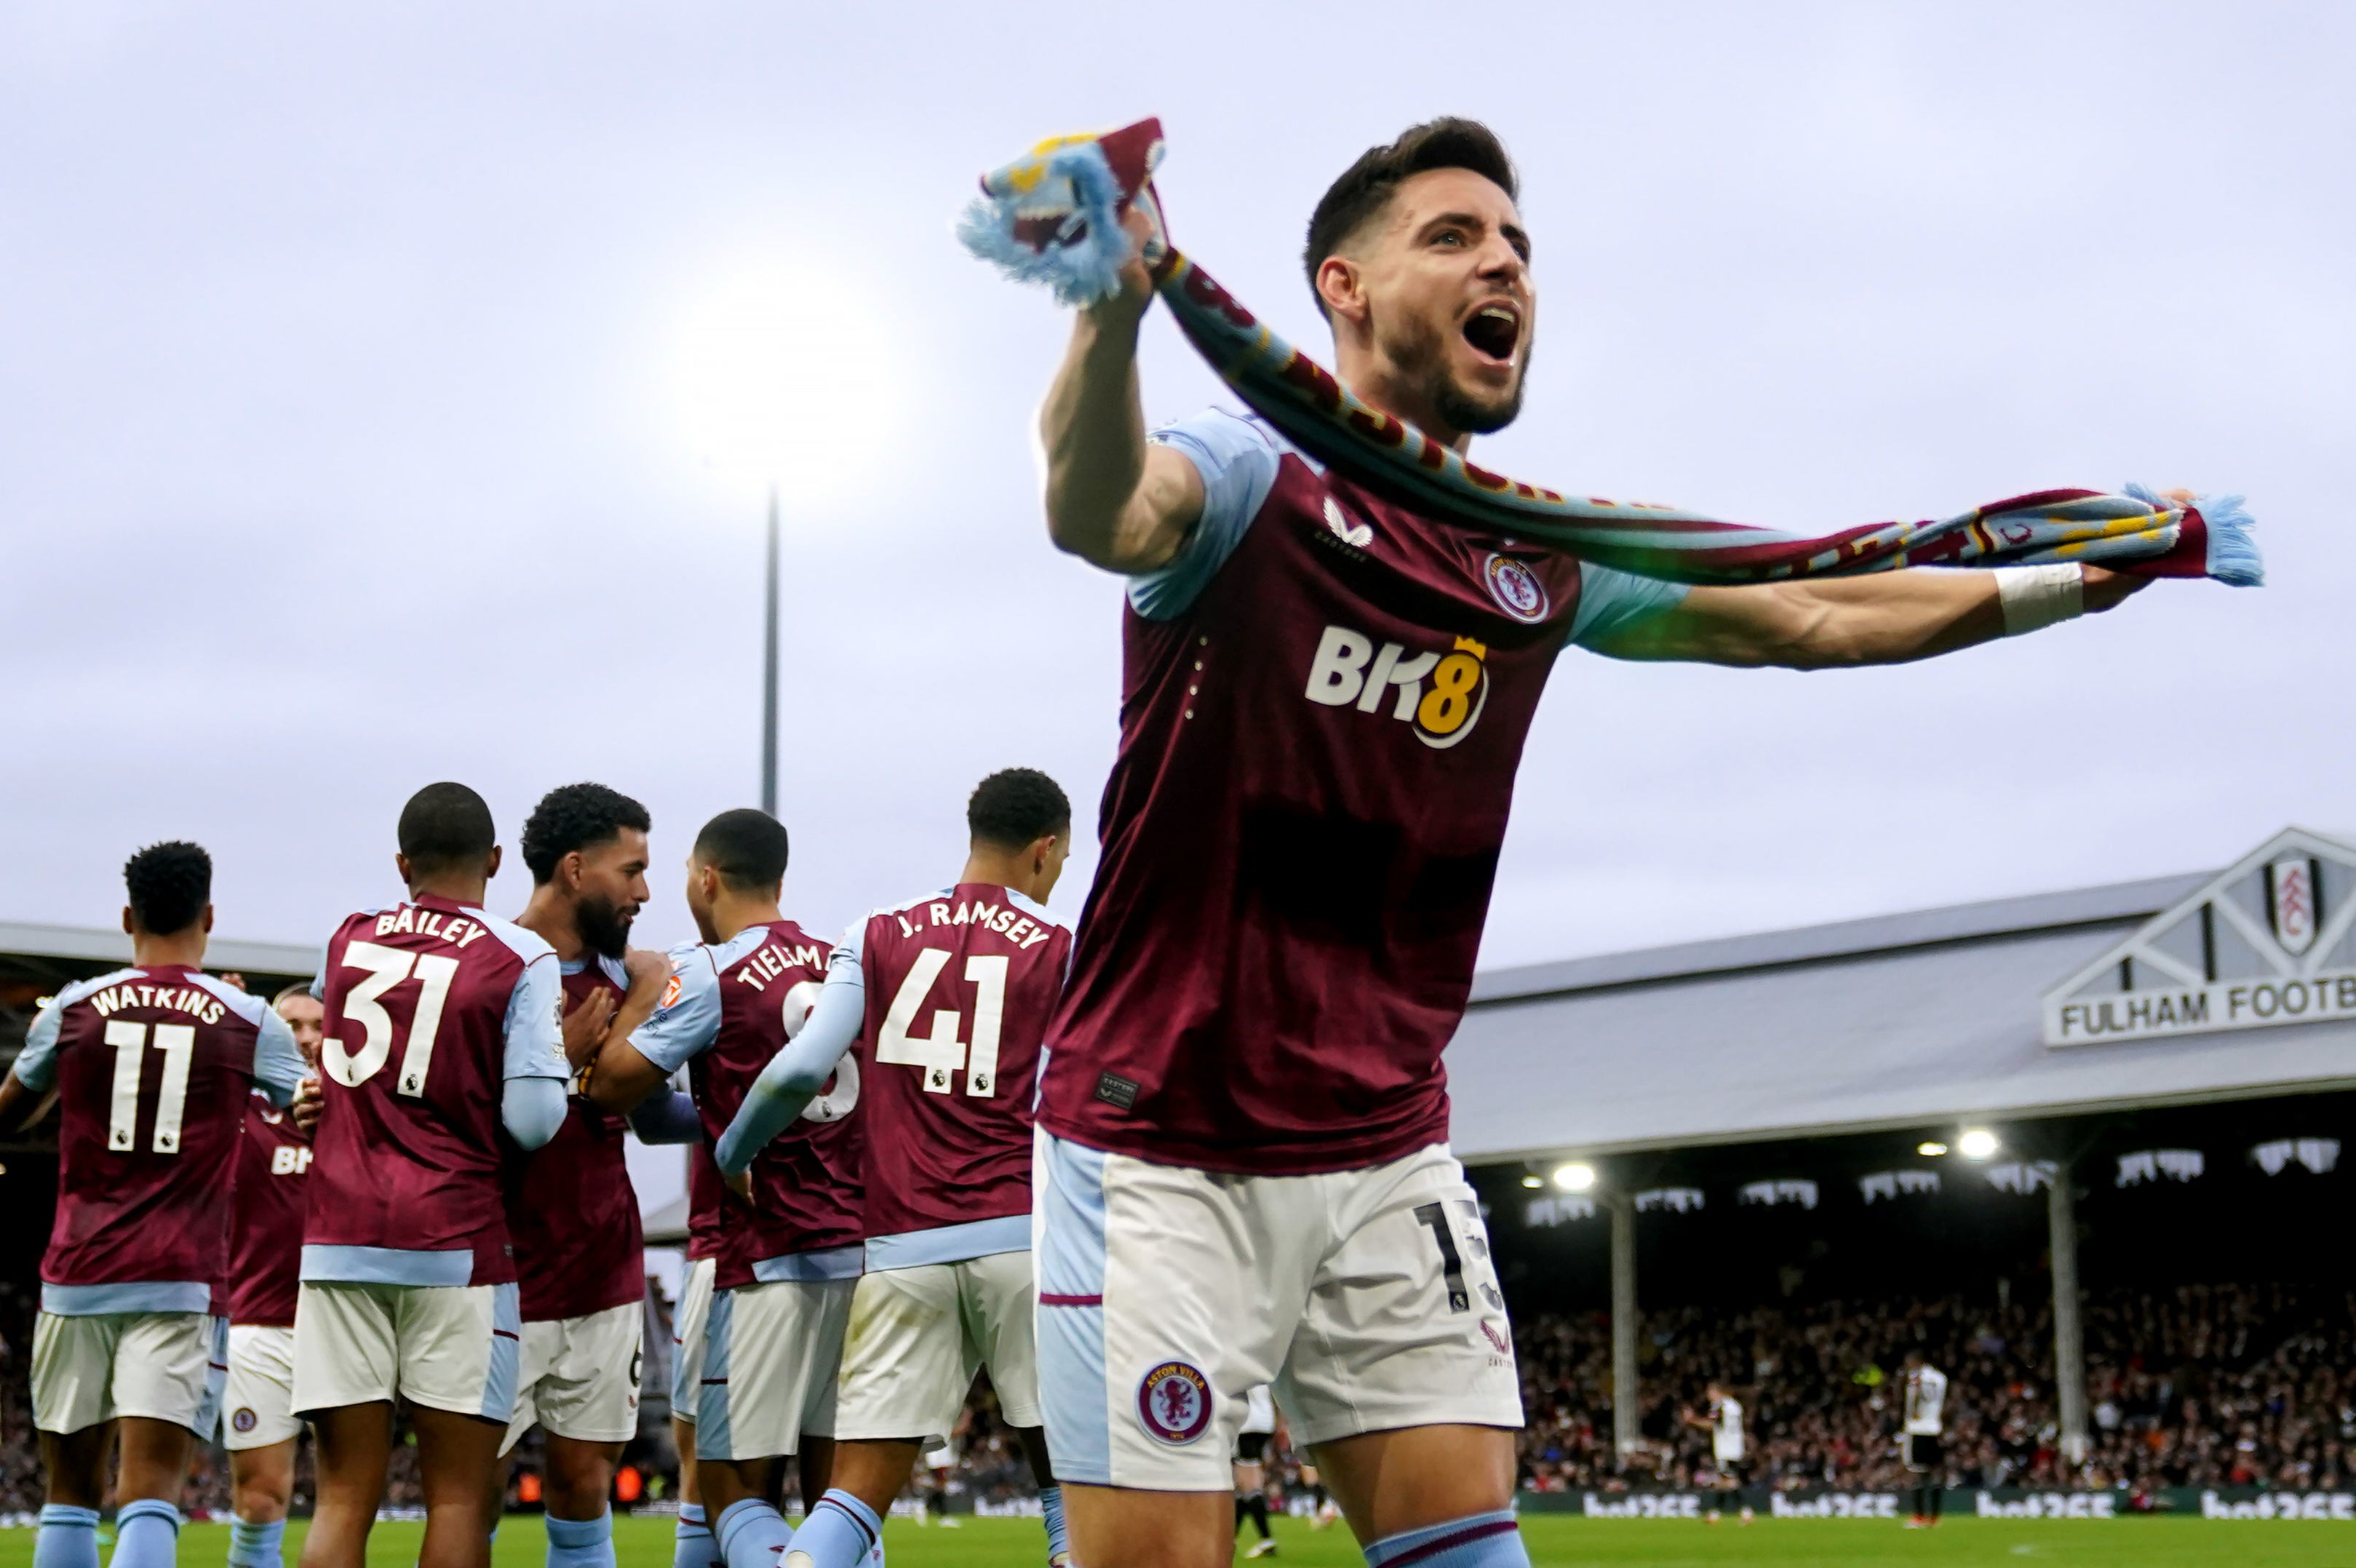 Aston Villa celebrated an important win over Fulham